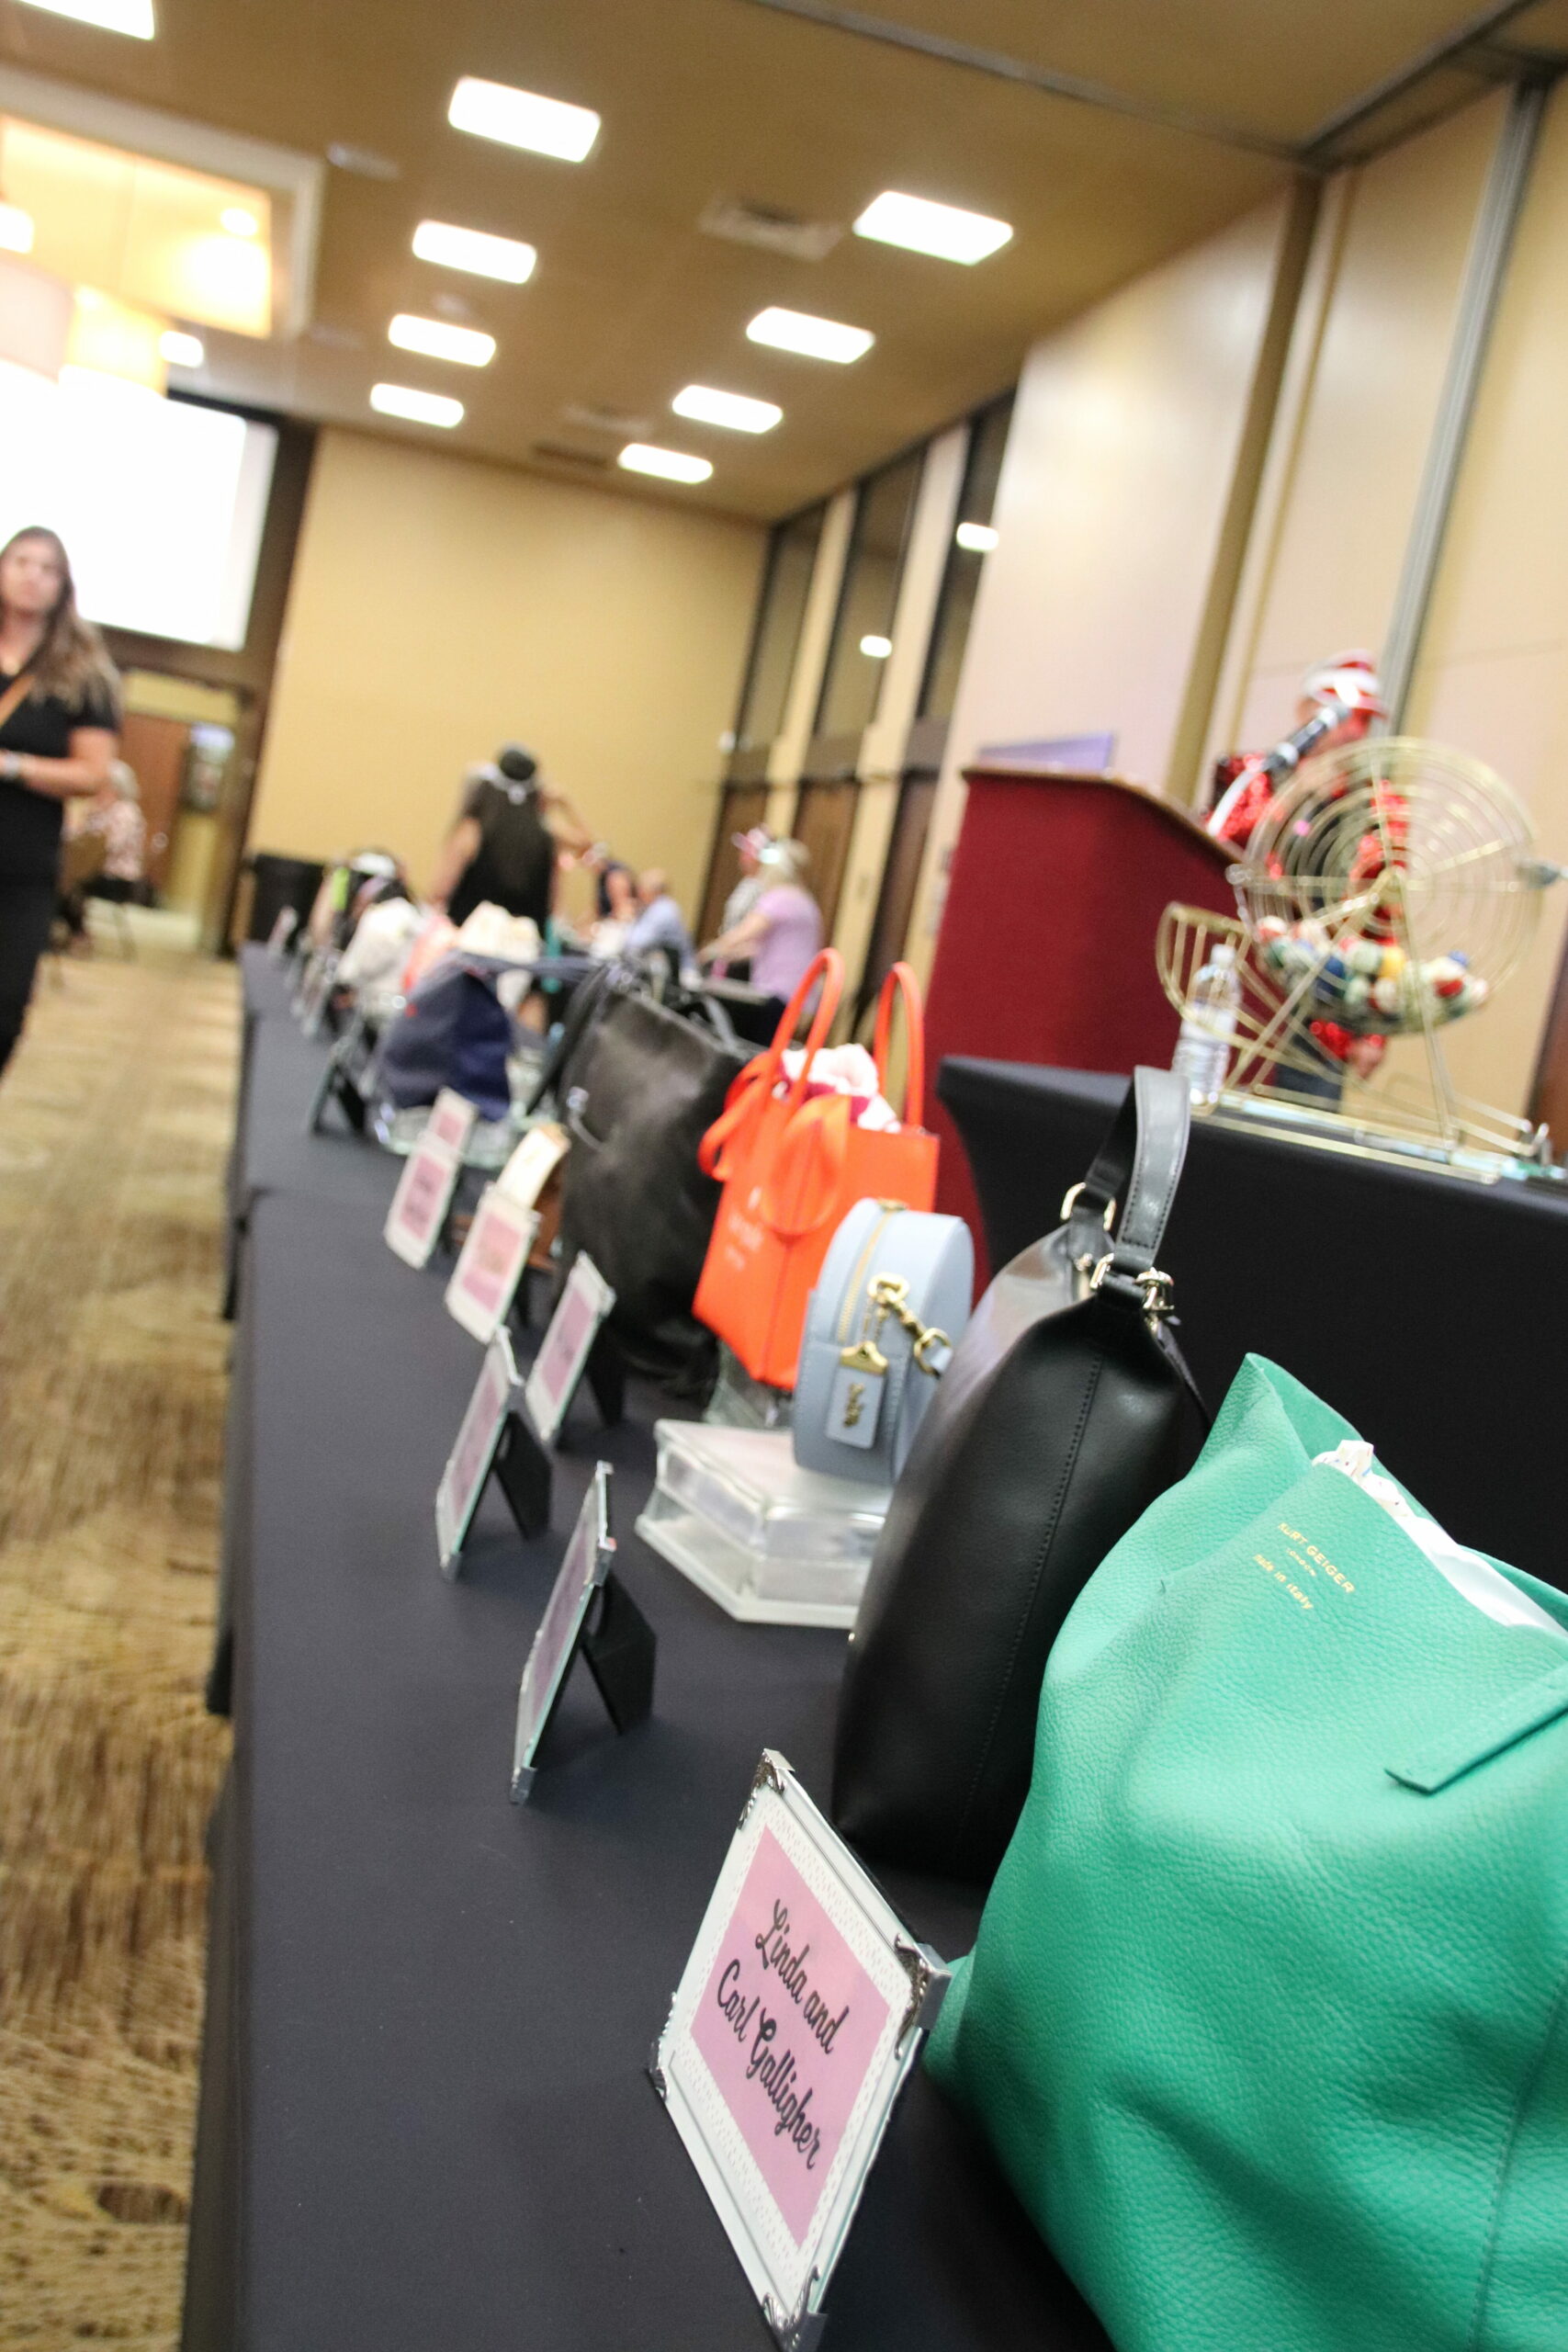 Health Care Foundation expects sold out crowd for 3rd Annual Designer Handbag Bingo